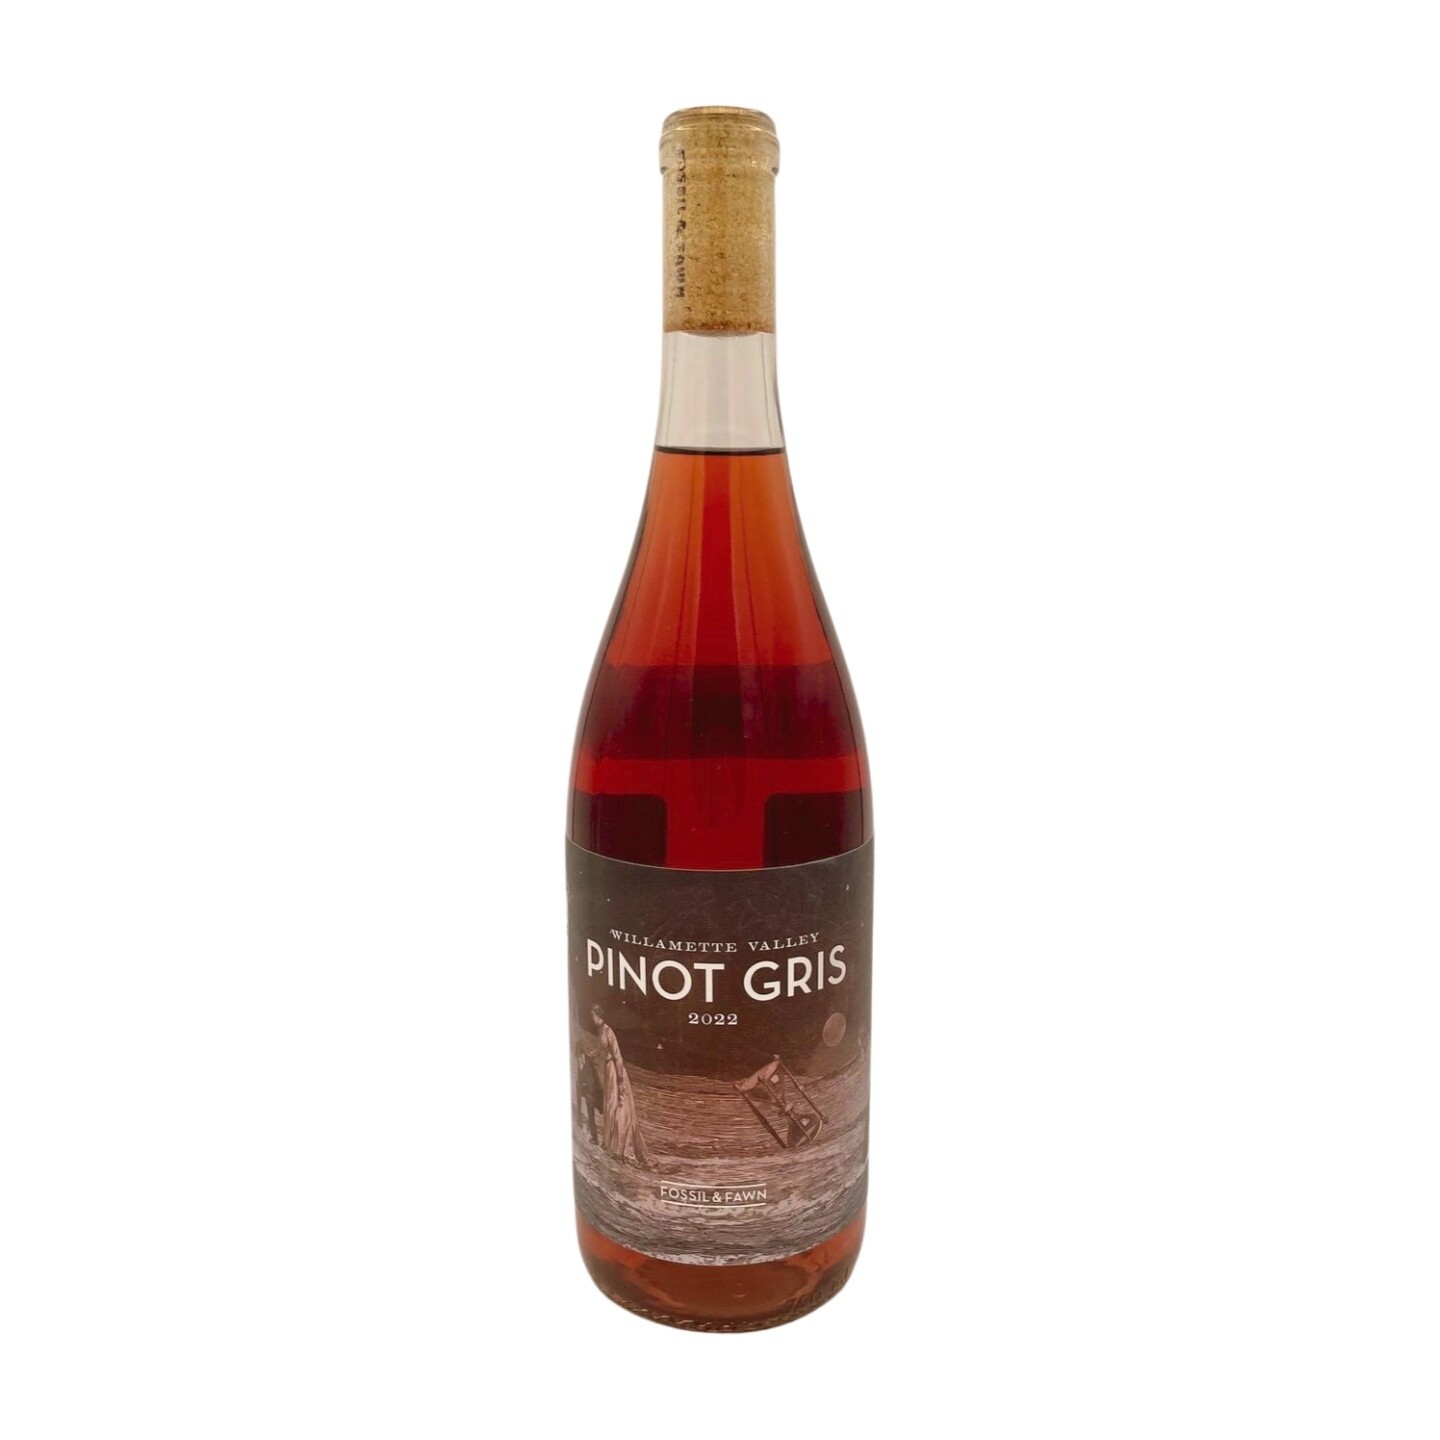 Fossil & Fawn Willamette Valley Pinot Gris 2022